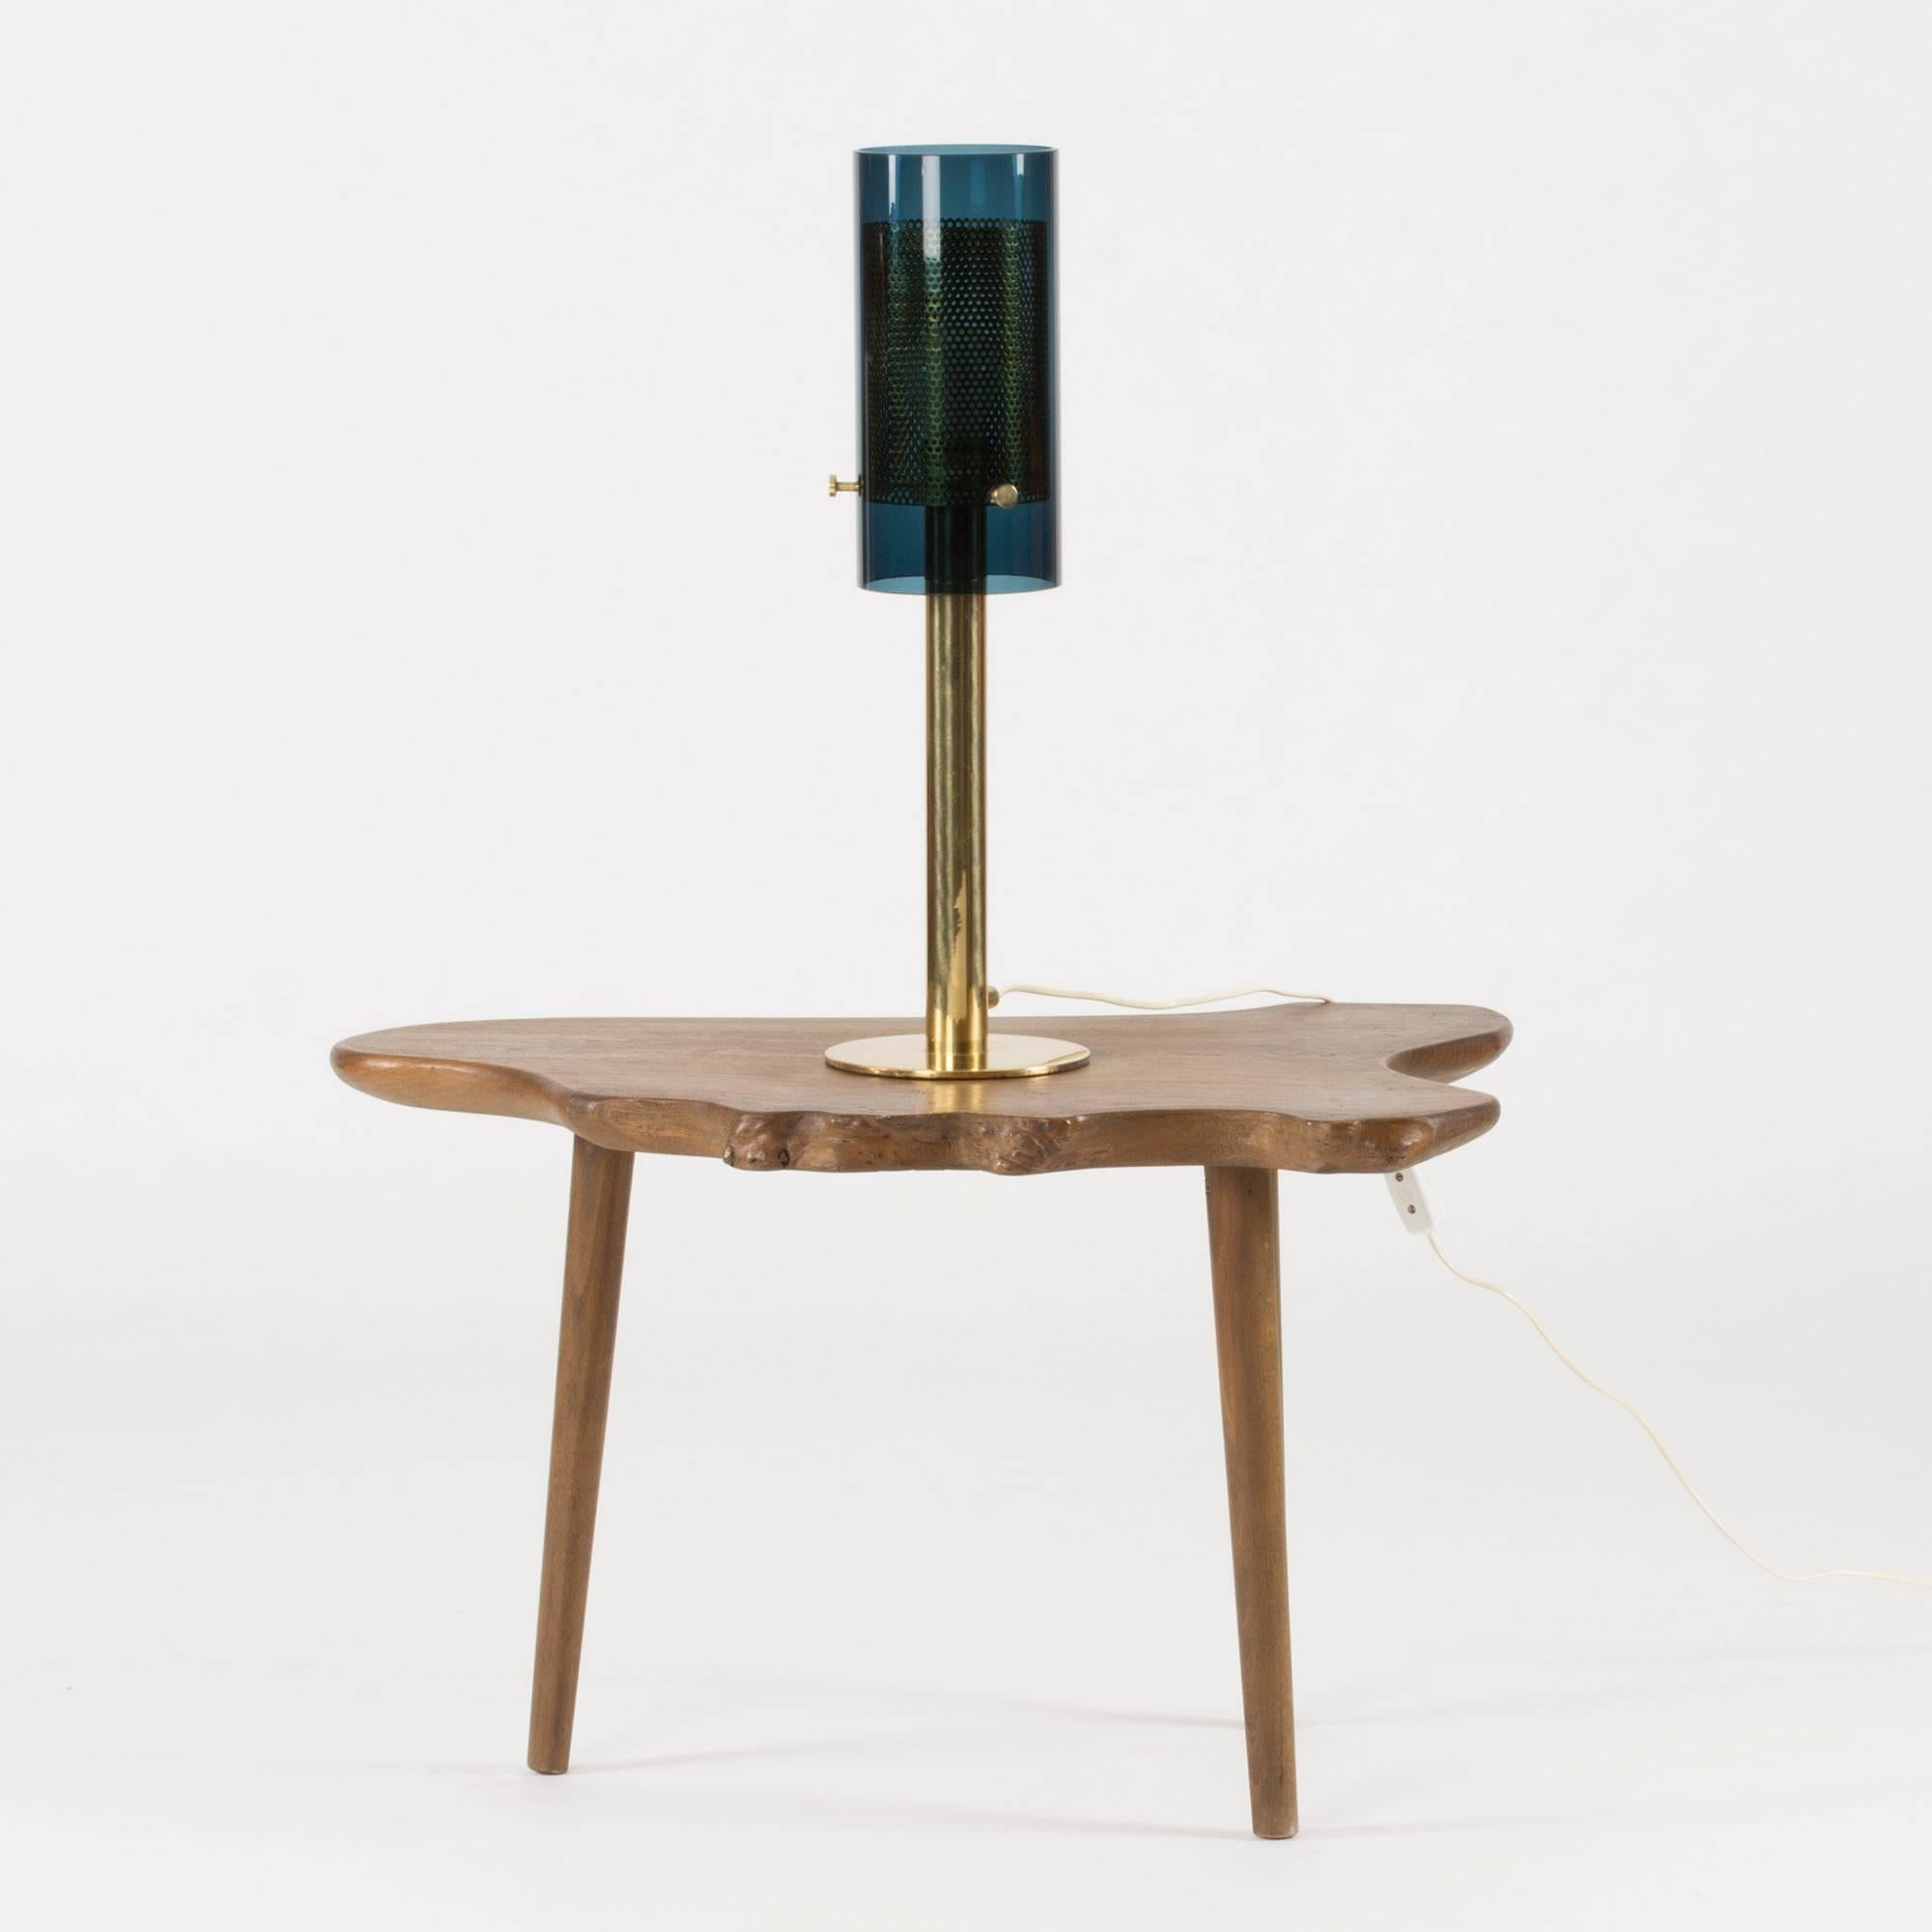 Amazing brass table lamp by Hans-Agne Jakobsson. Tall and heavy with a cylindrical petrol blue glass shade around an inner shade made from perforated brass. The shades are attached with large decorative brass screws.